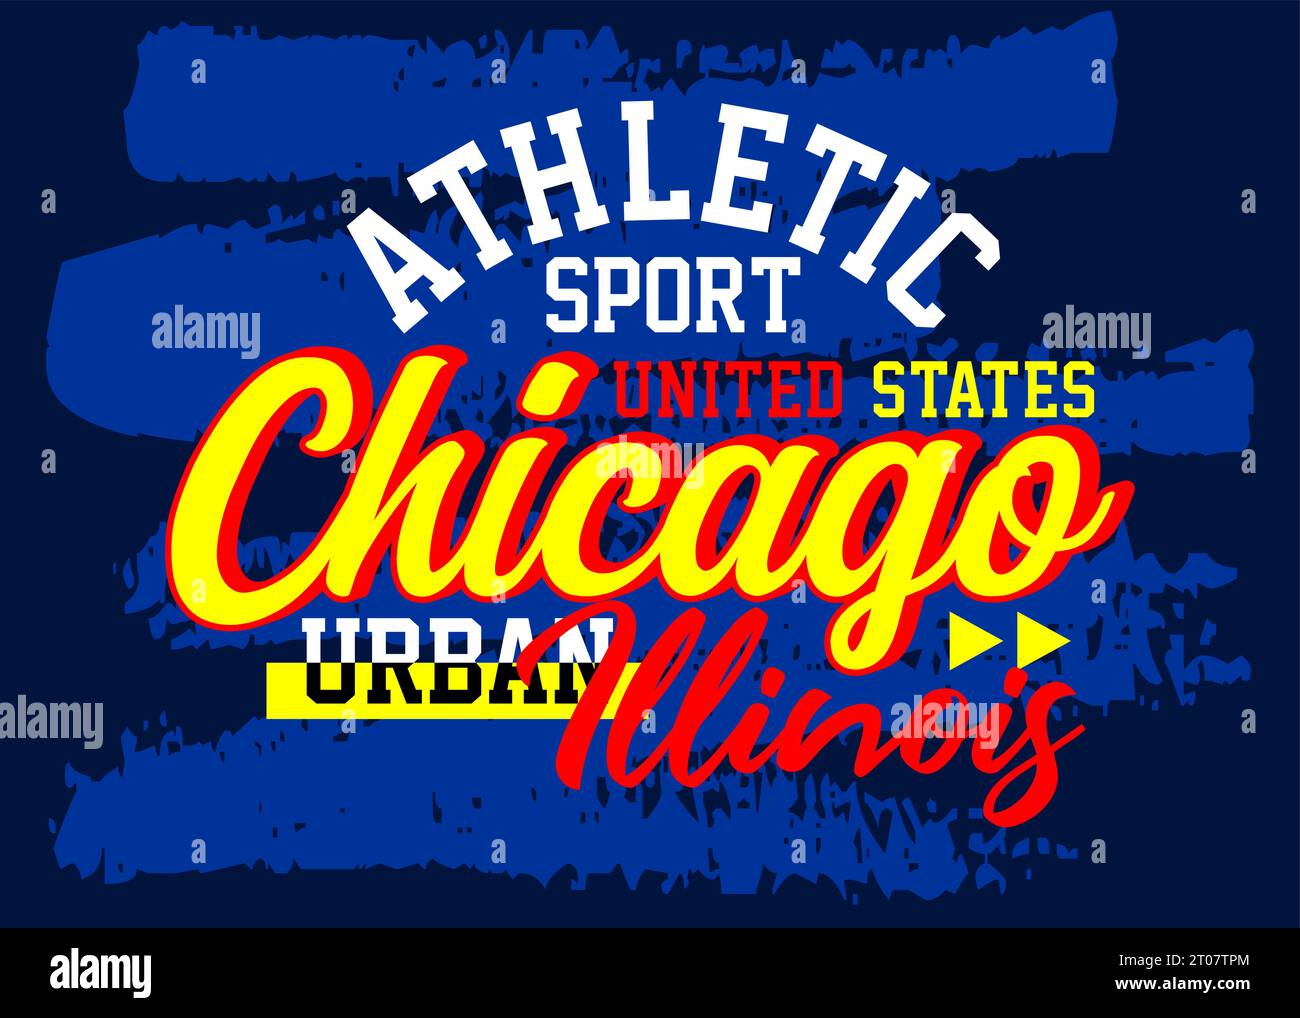 Chicago Illinois urban athletic sports typeface vintage college, typography, for t-shirt, posters, labels, etc. Stock Vector